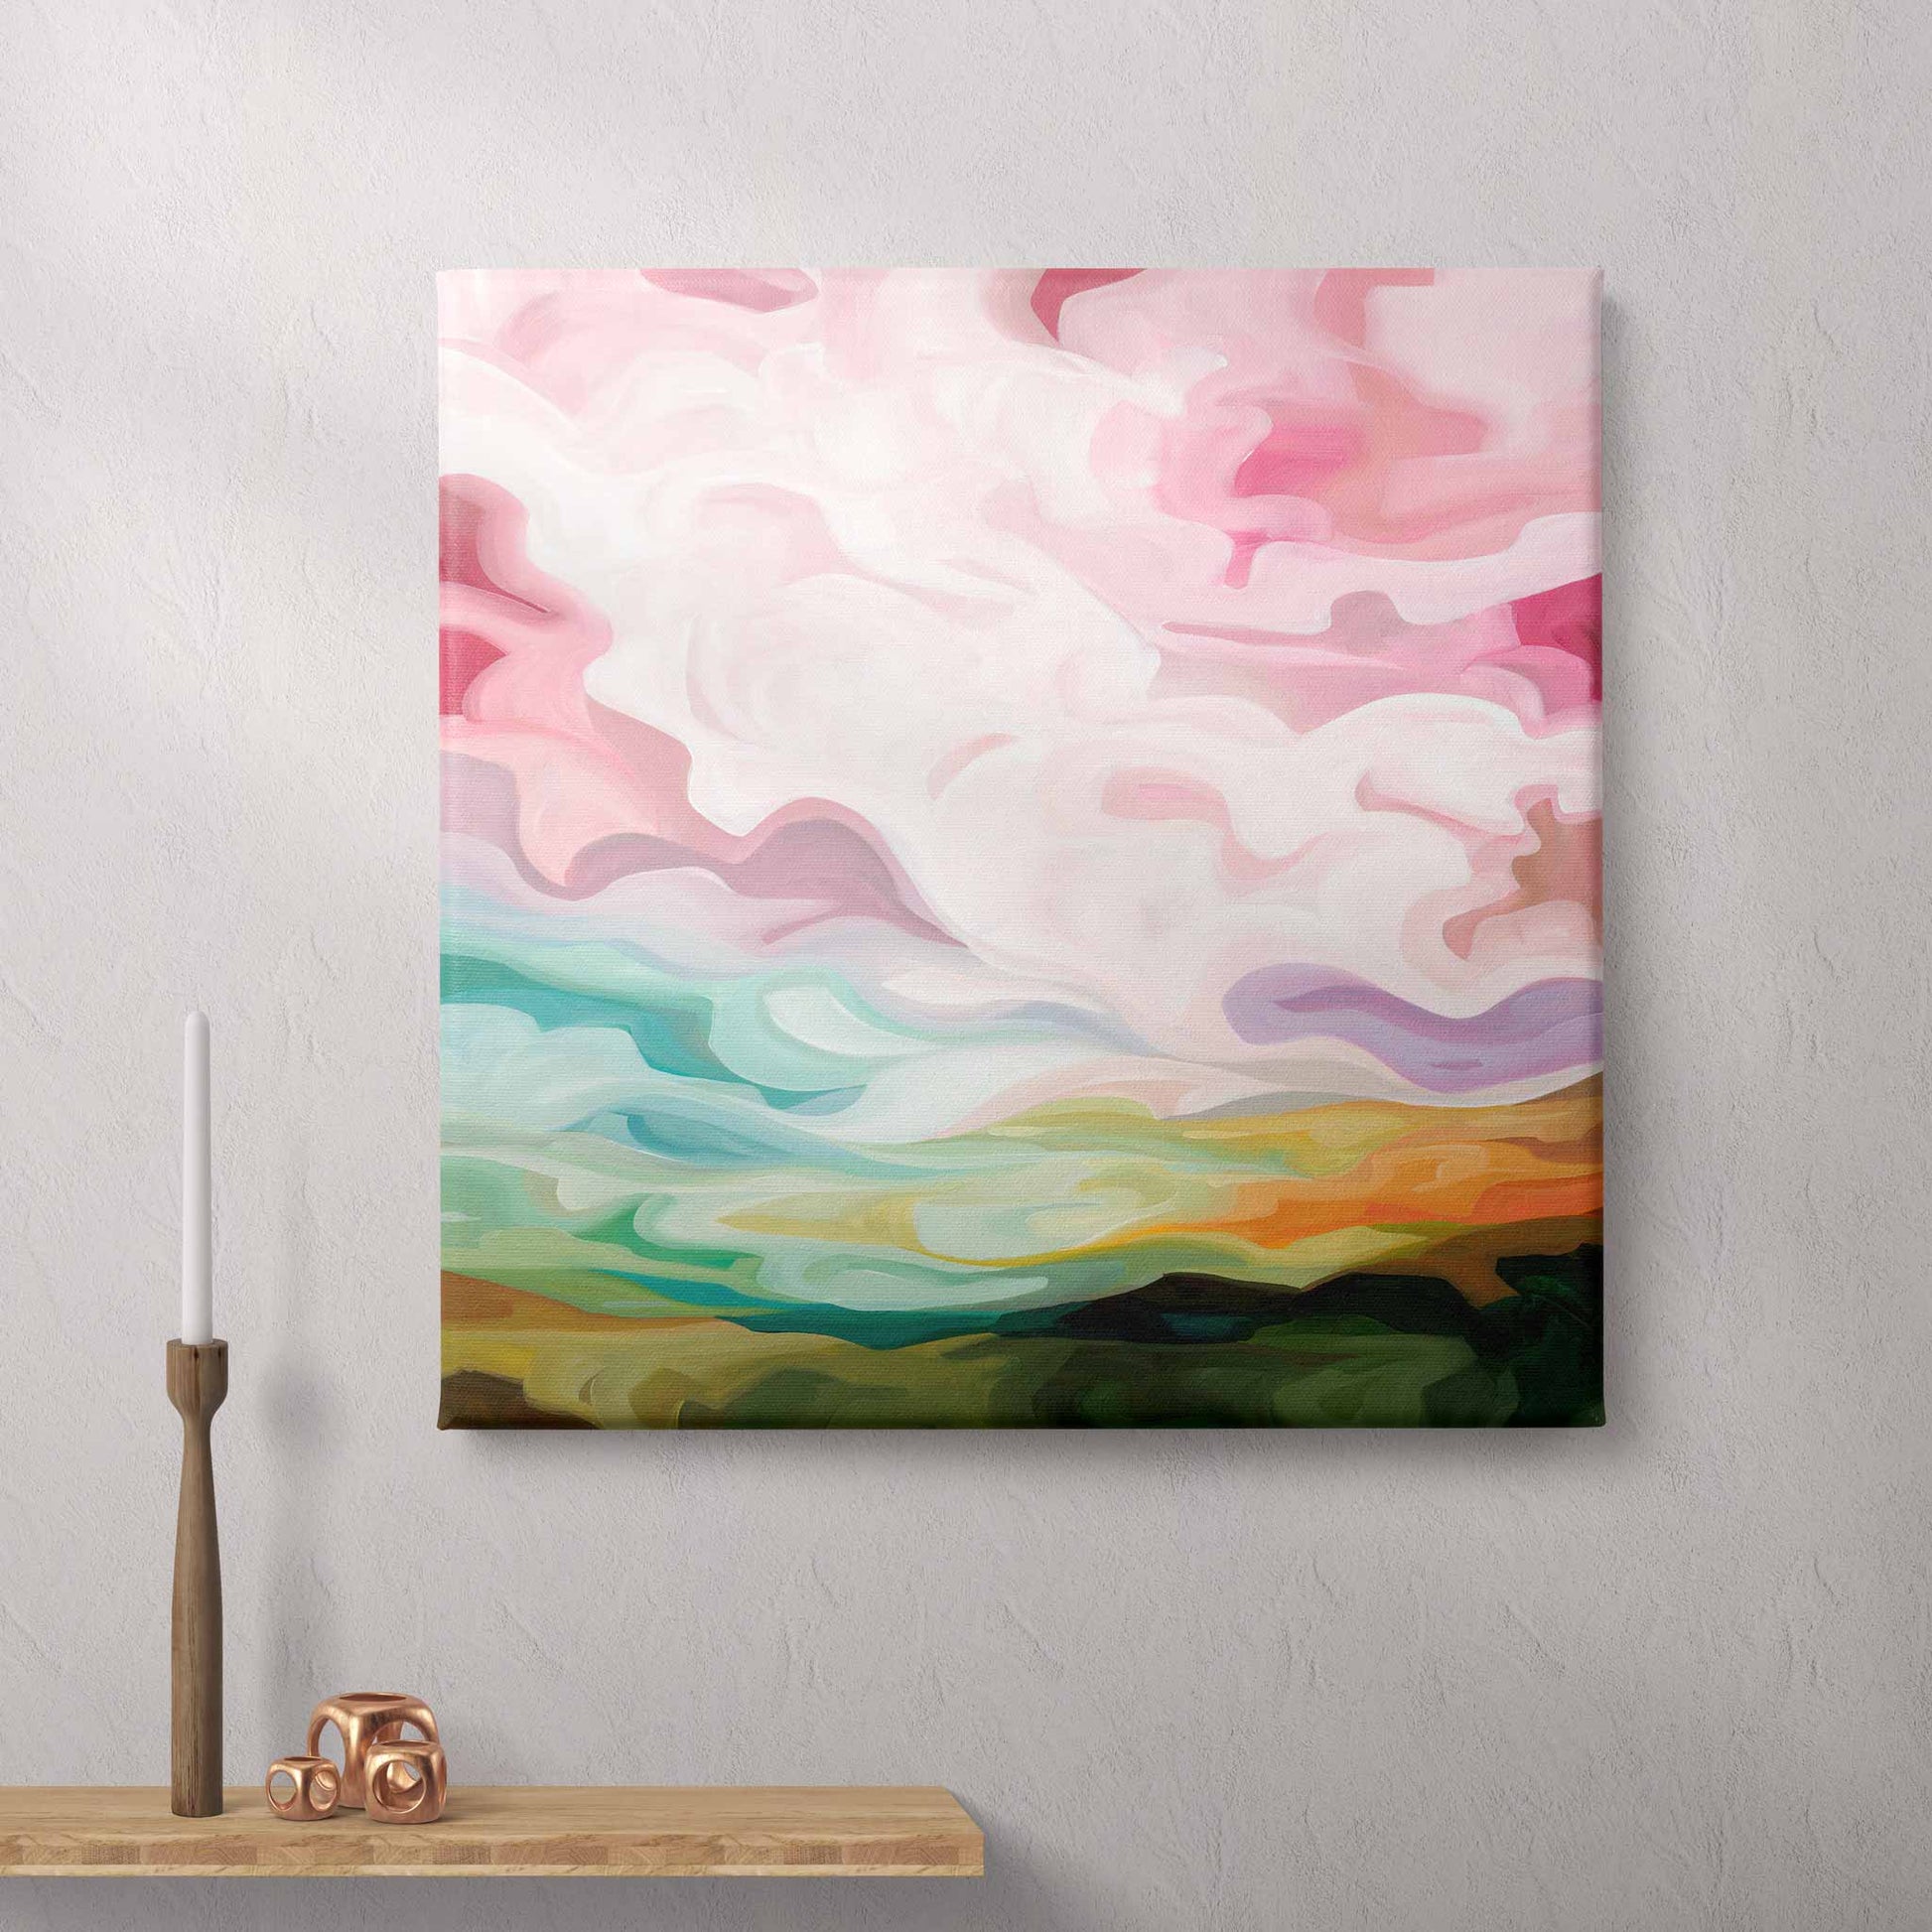 Large canvas art print of a pastel sunrise painting by Canadian abstract artist Susannah Bleasby